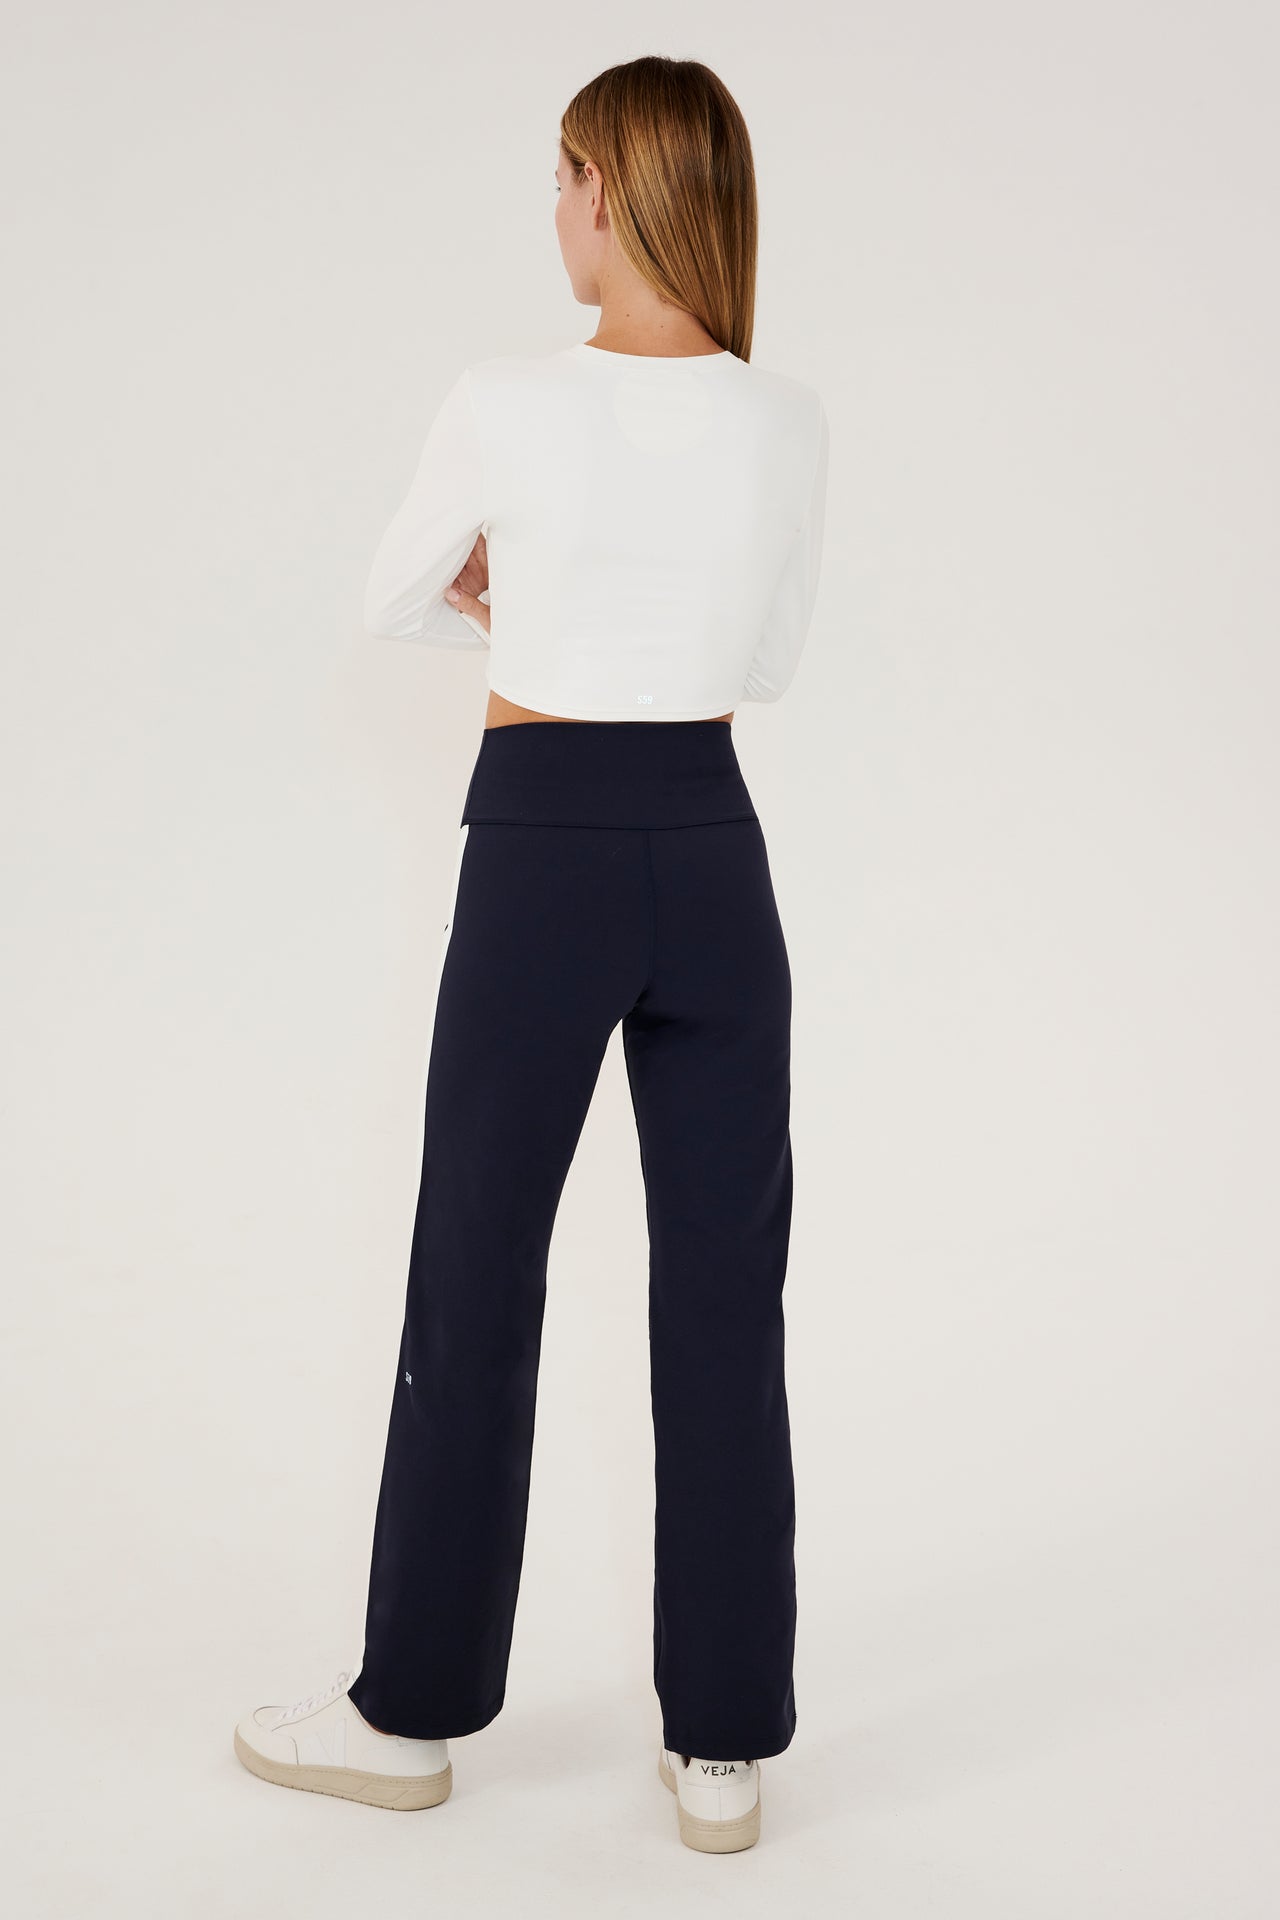 The back view of a woman wearing SPLITS59's Harper Supplex Pant in Indigo/White.